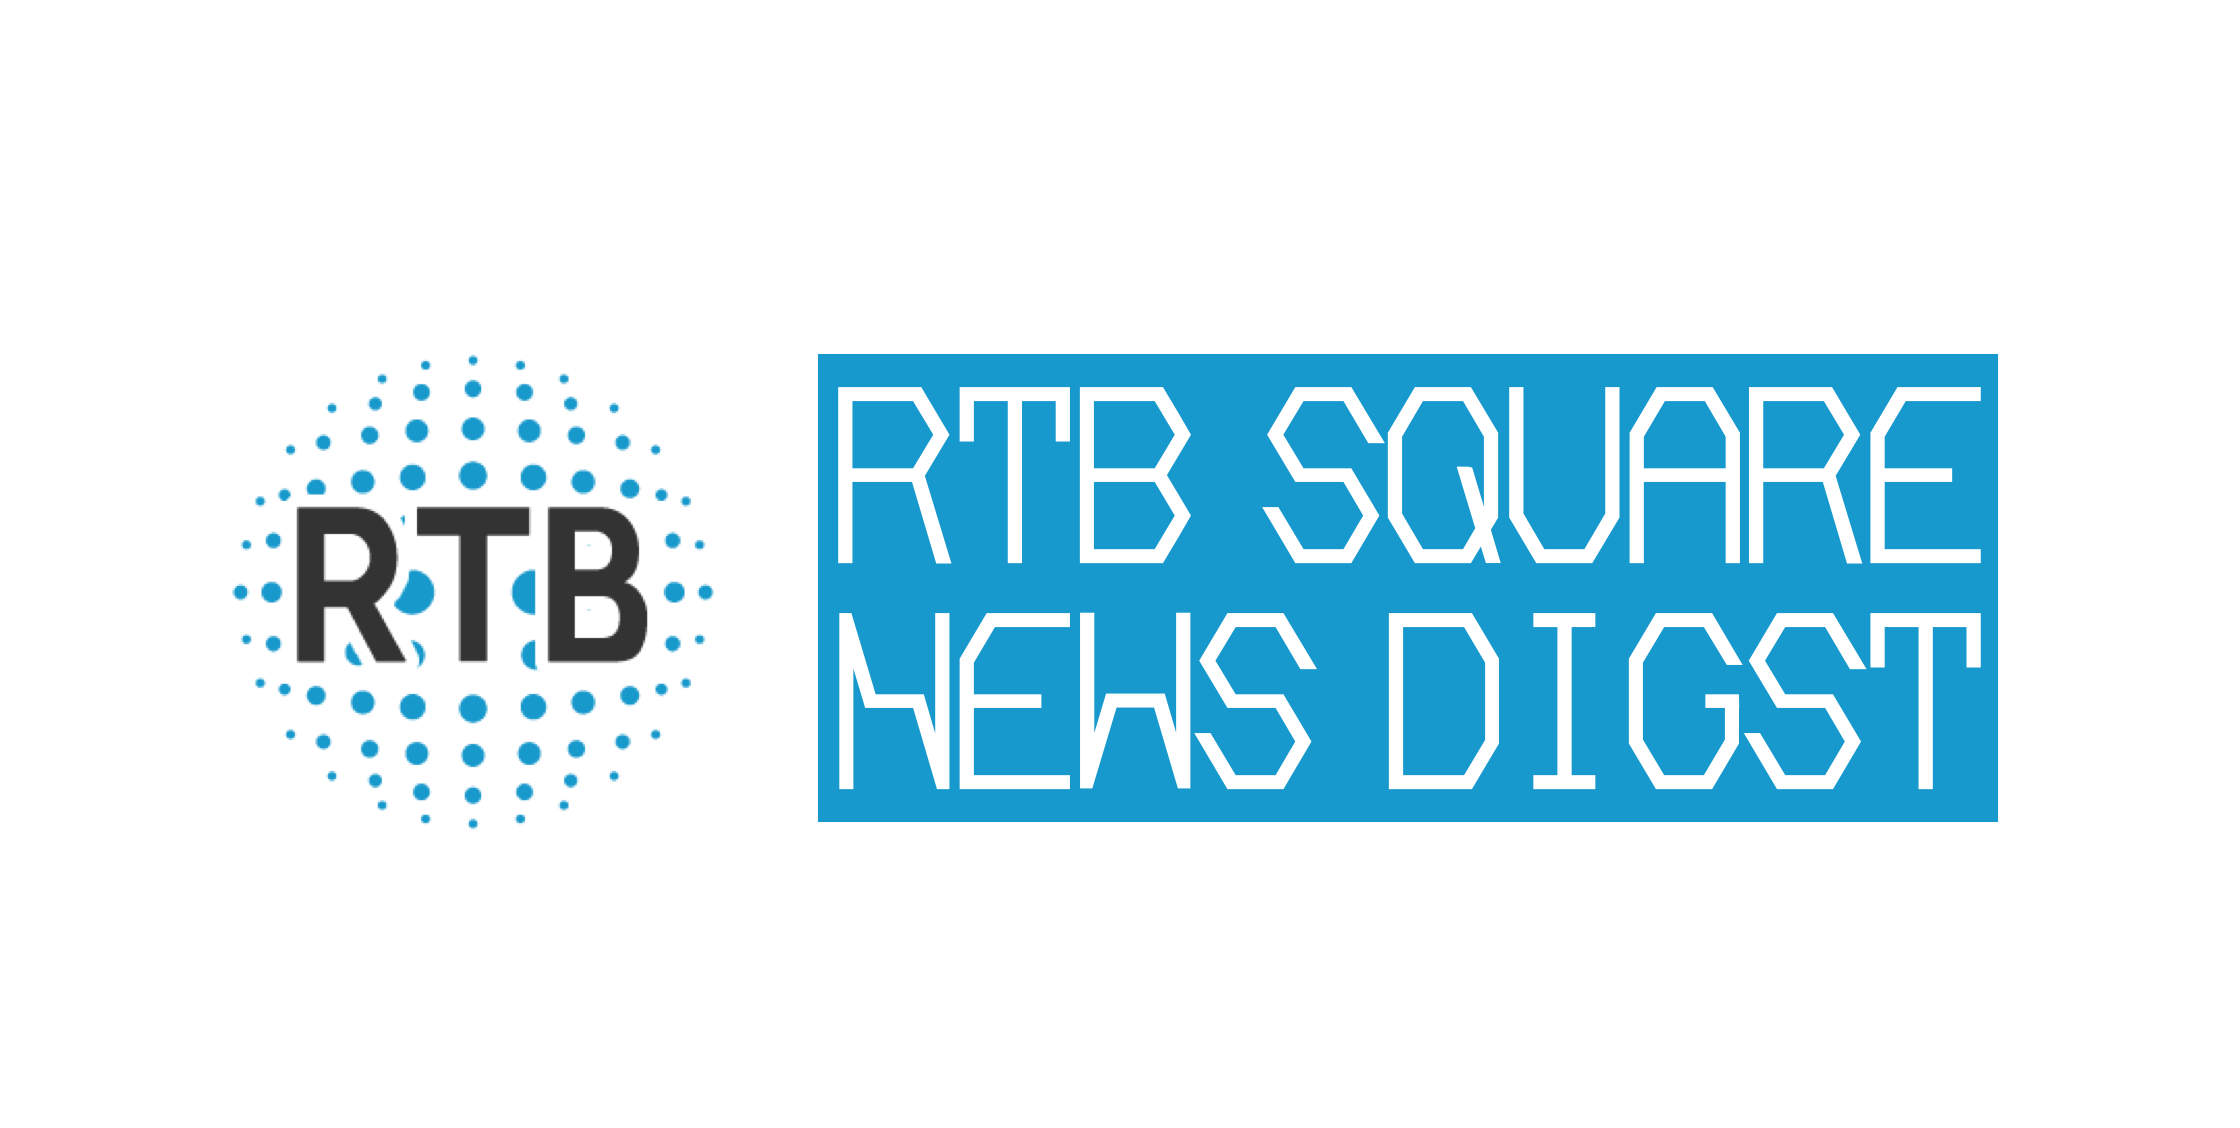 rtbsquare_news